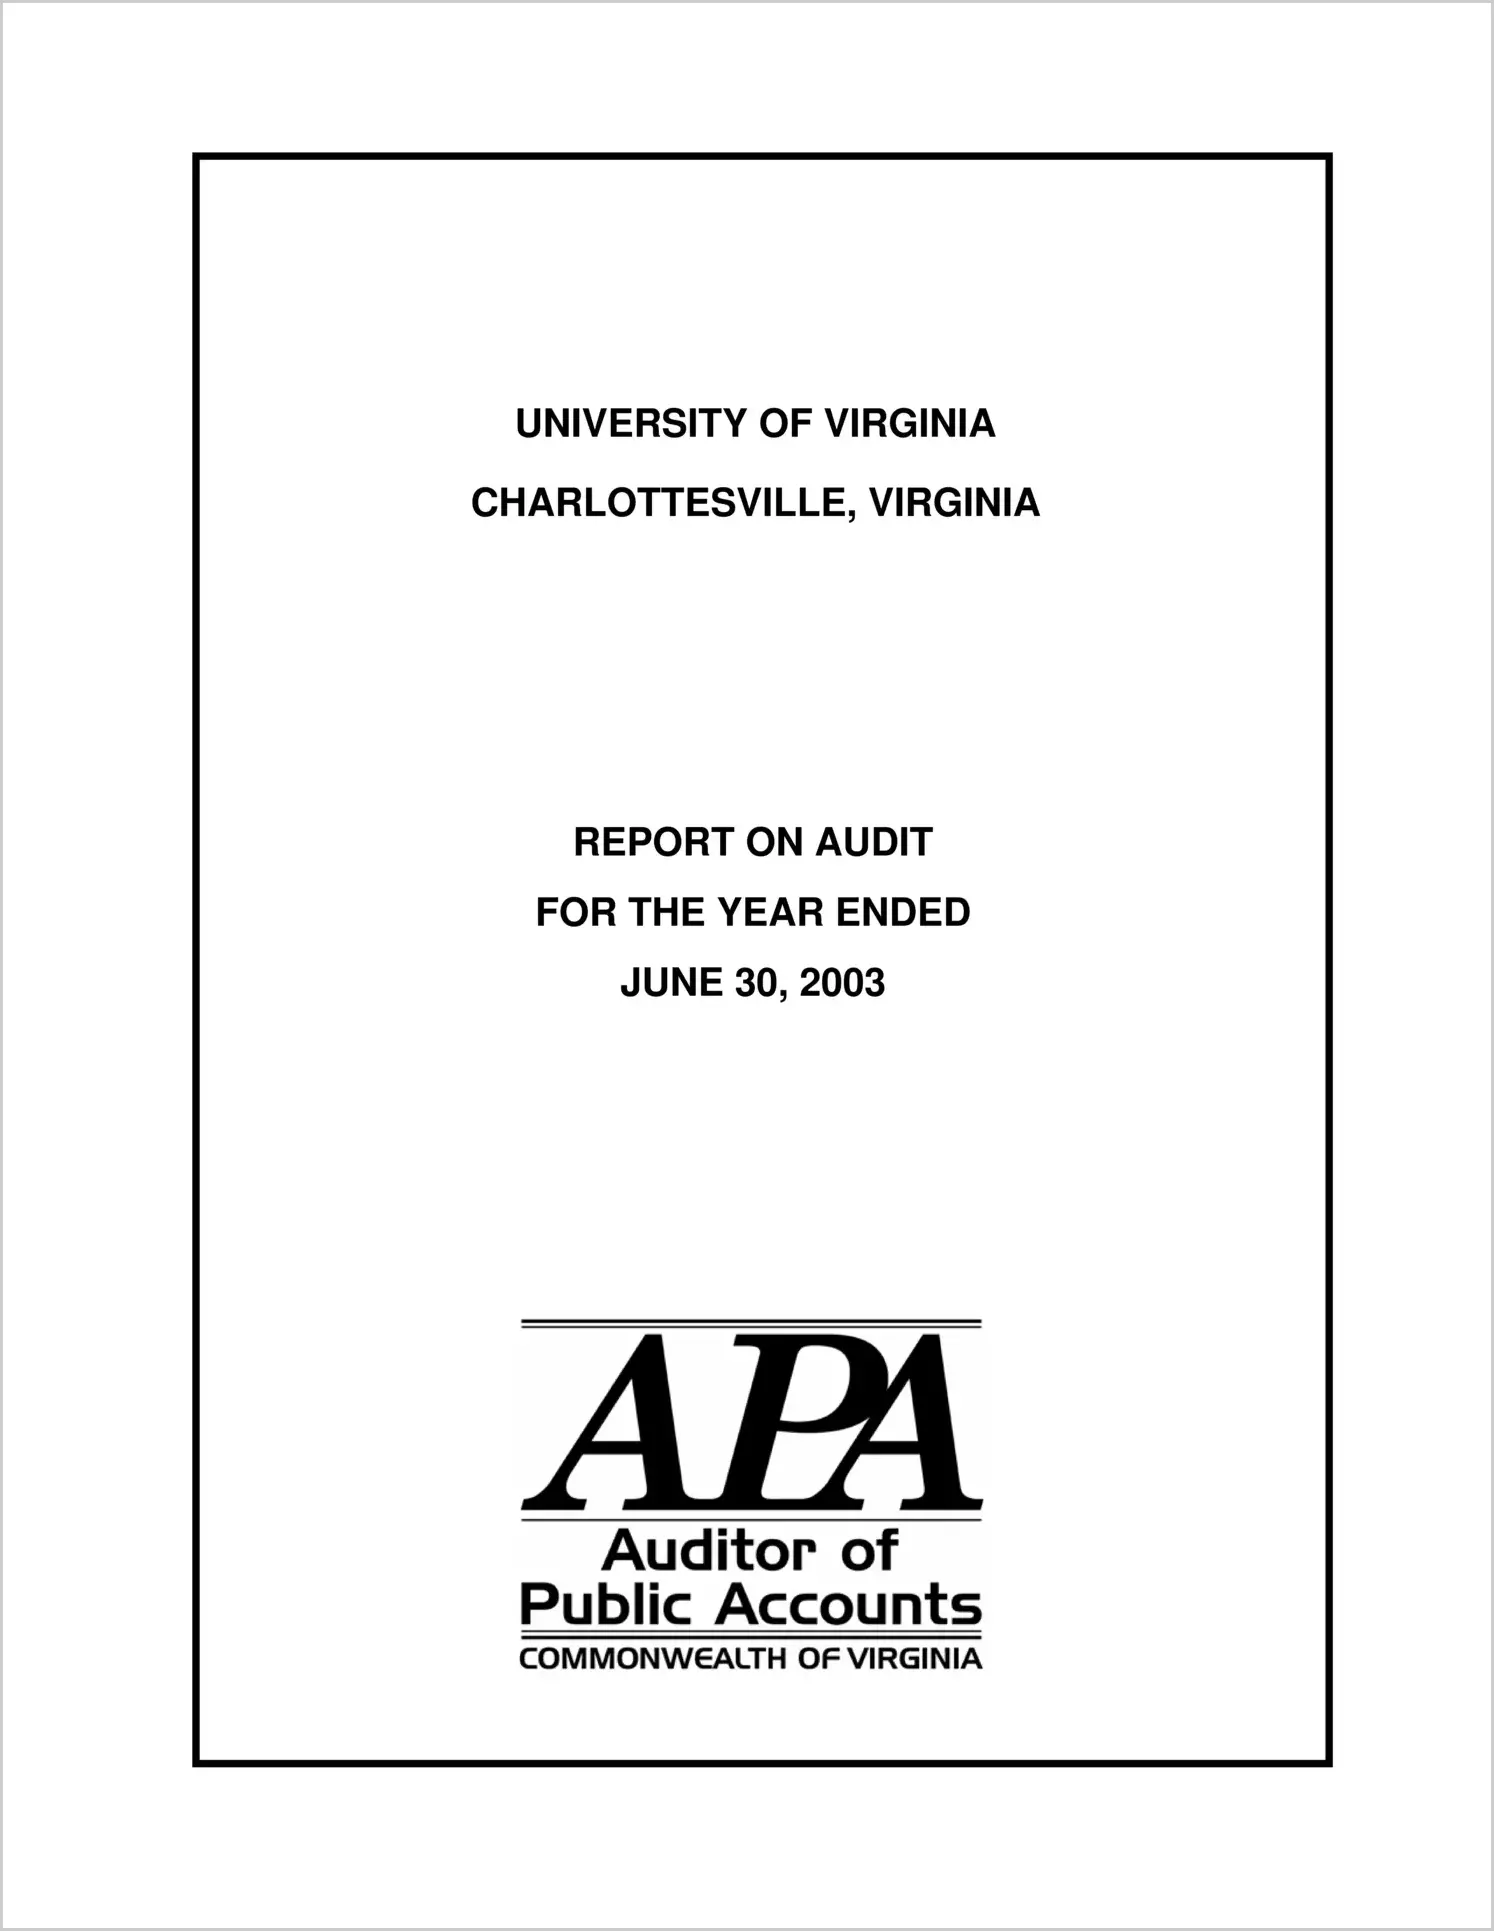 University of Virginia for the year ended June 30, 2003